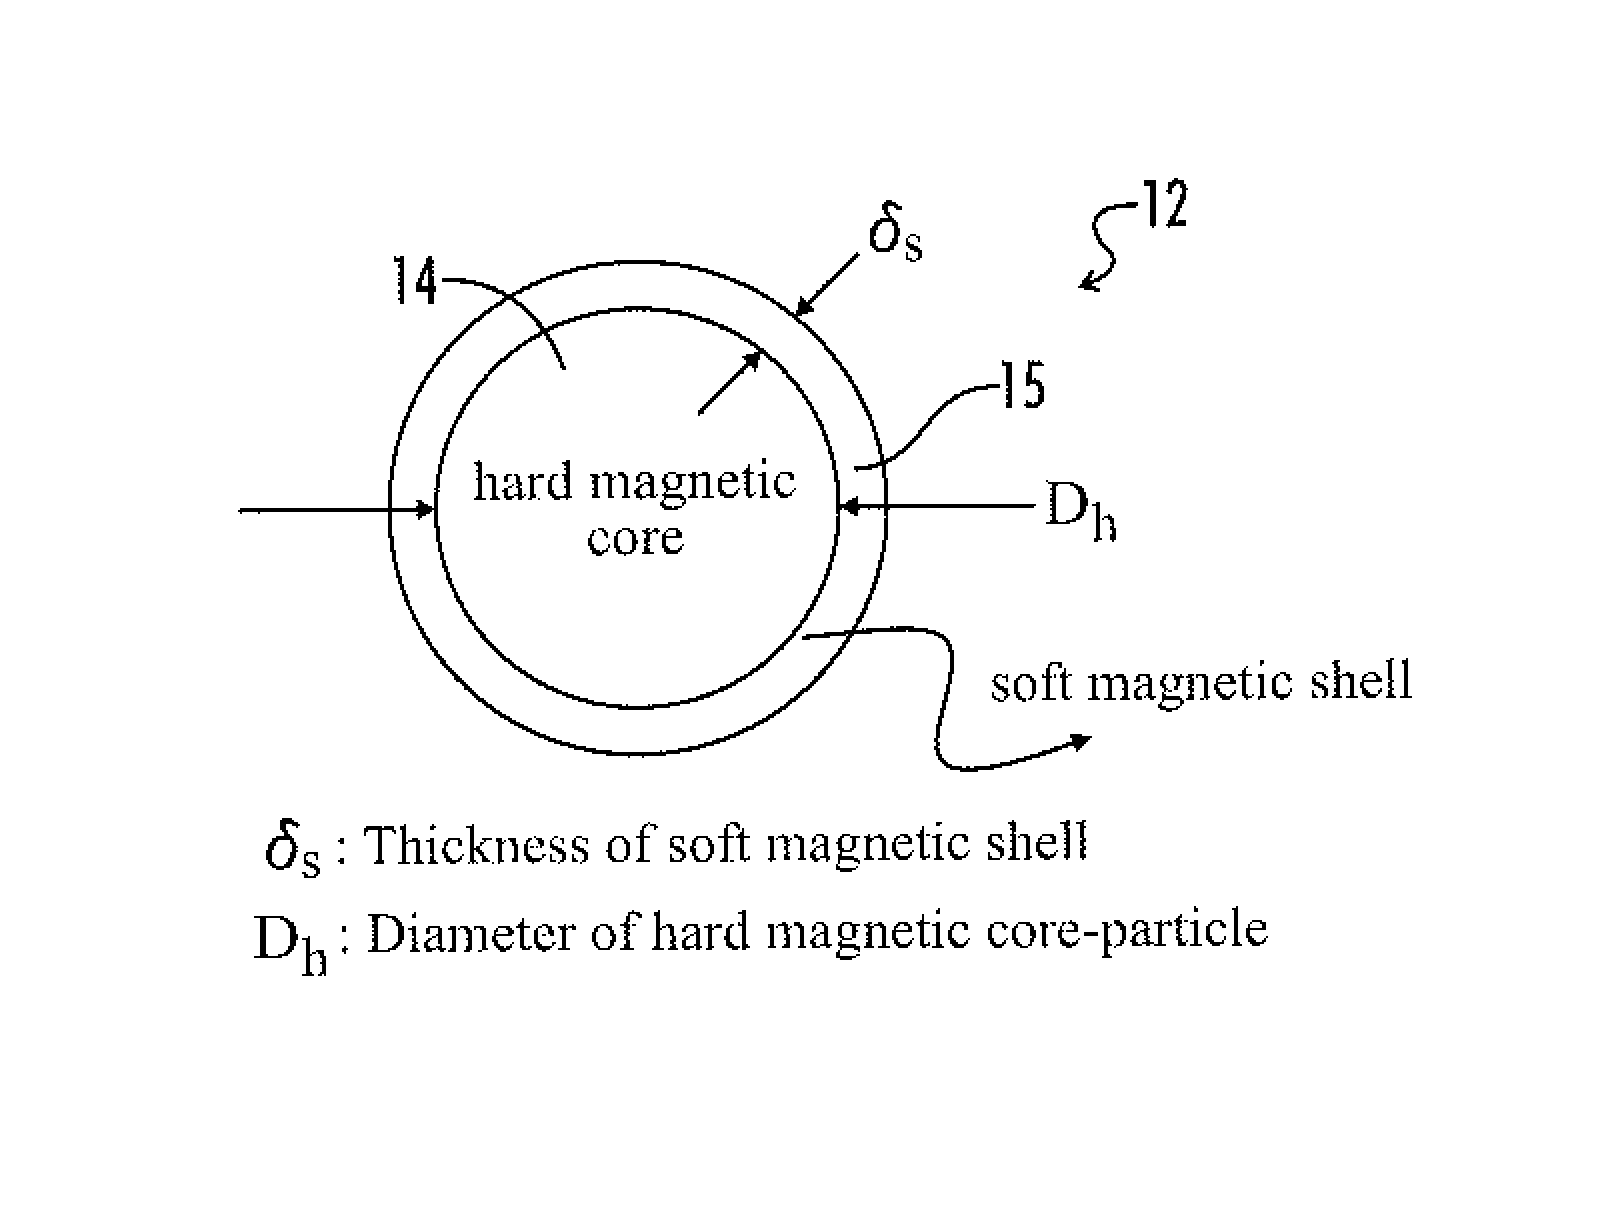 Magnetic exchange coupled core-shell nanomagnets